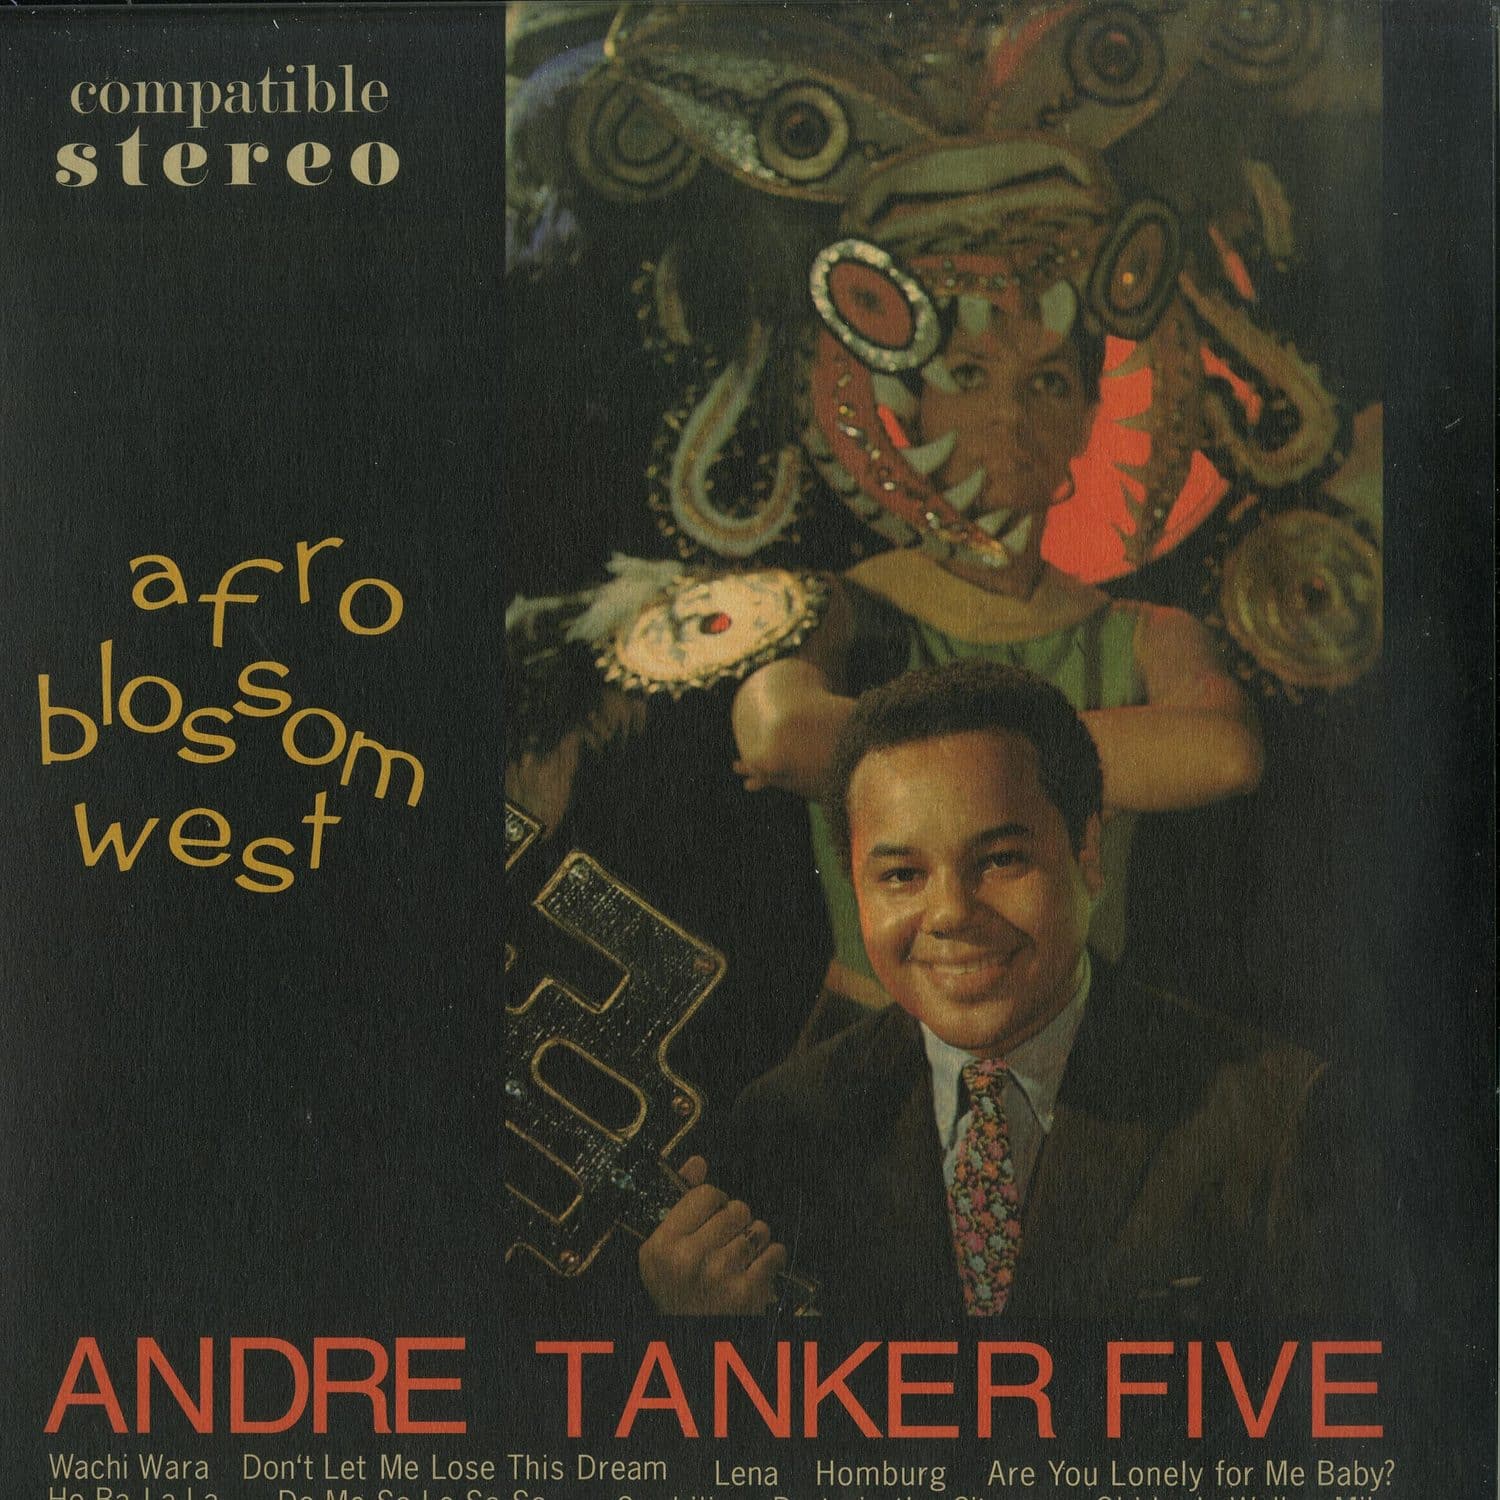 Andre Tanker Five - AFRO BLOSSOM WEST 